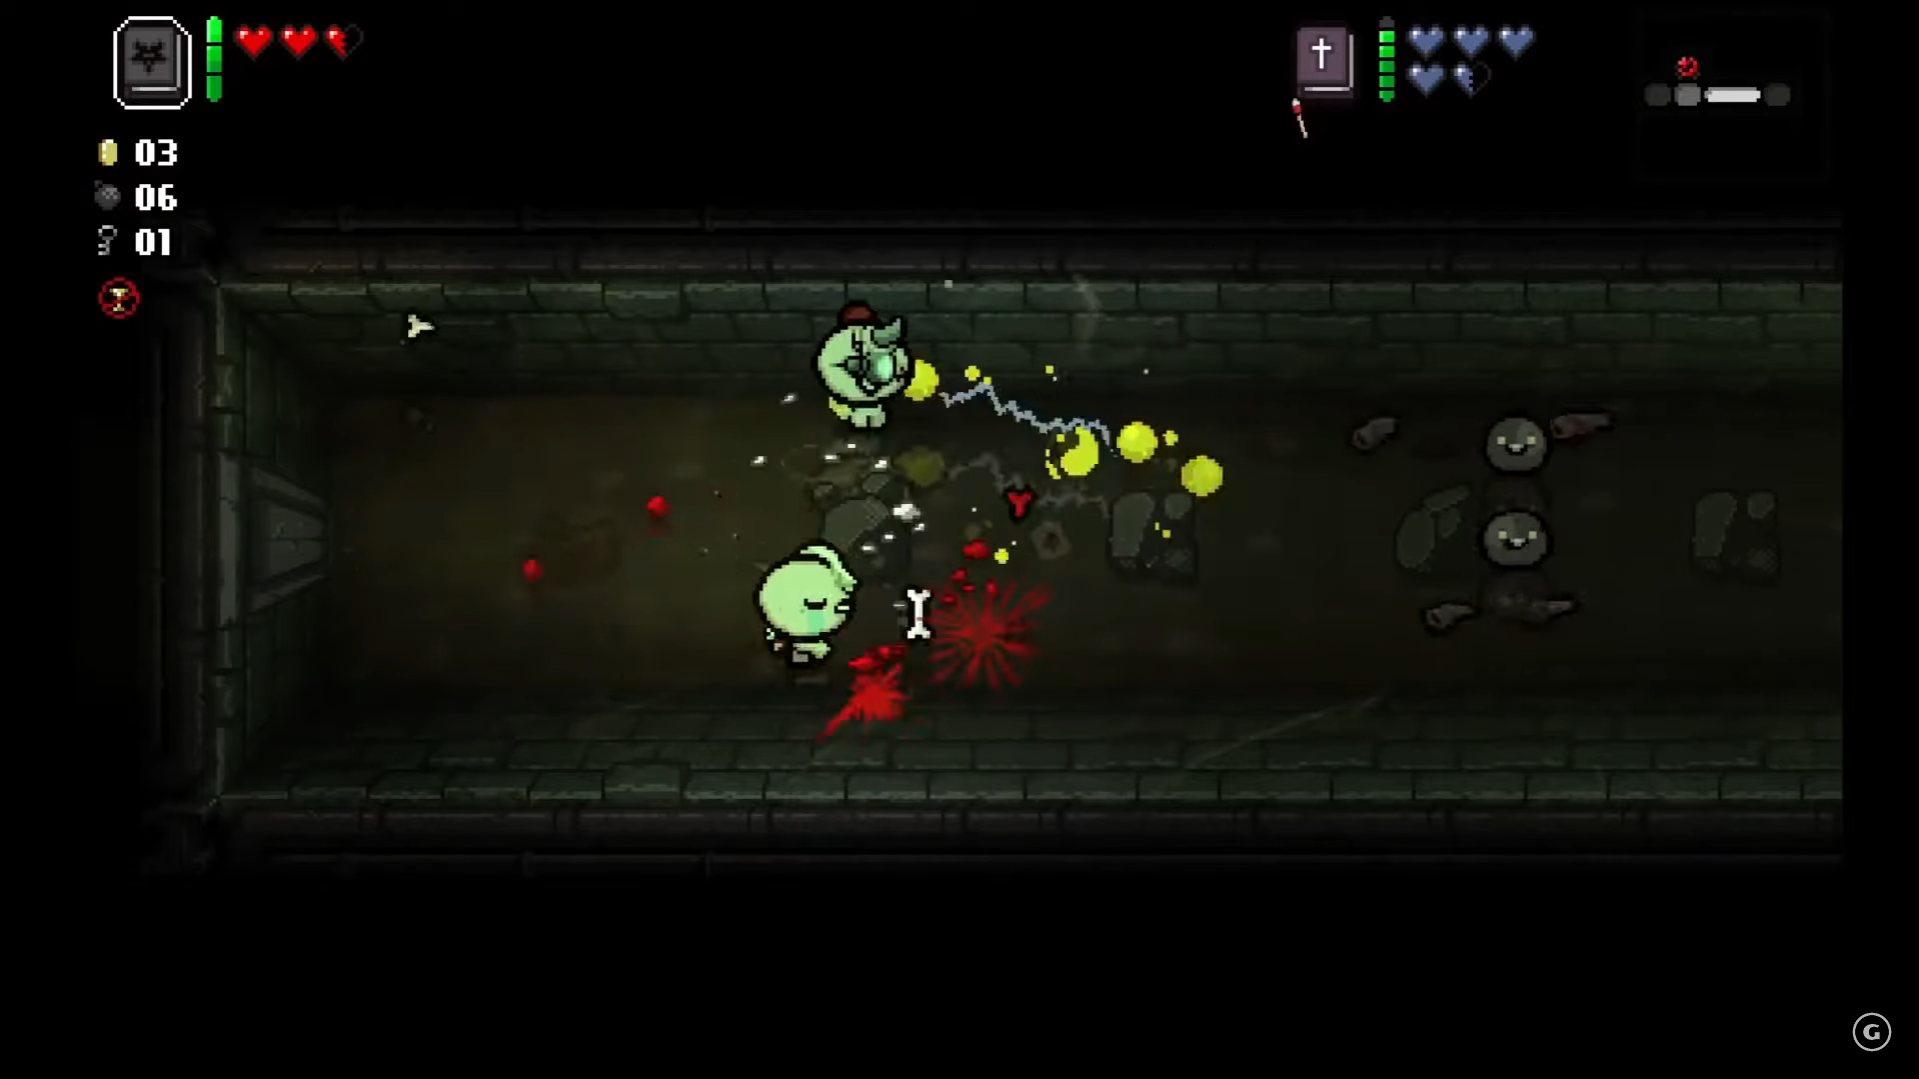 Image of local co-op in The Binding of Isaac with two players working together to kill enemies.